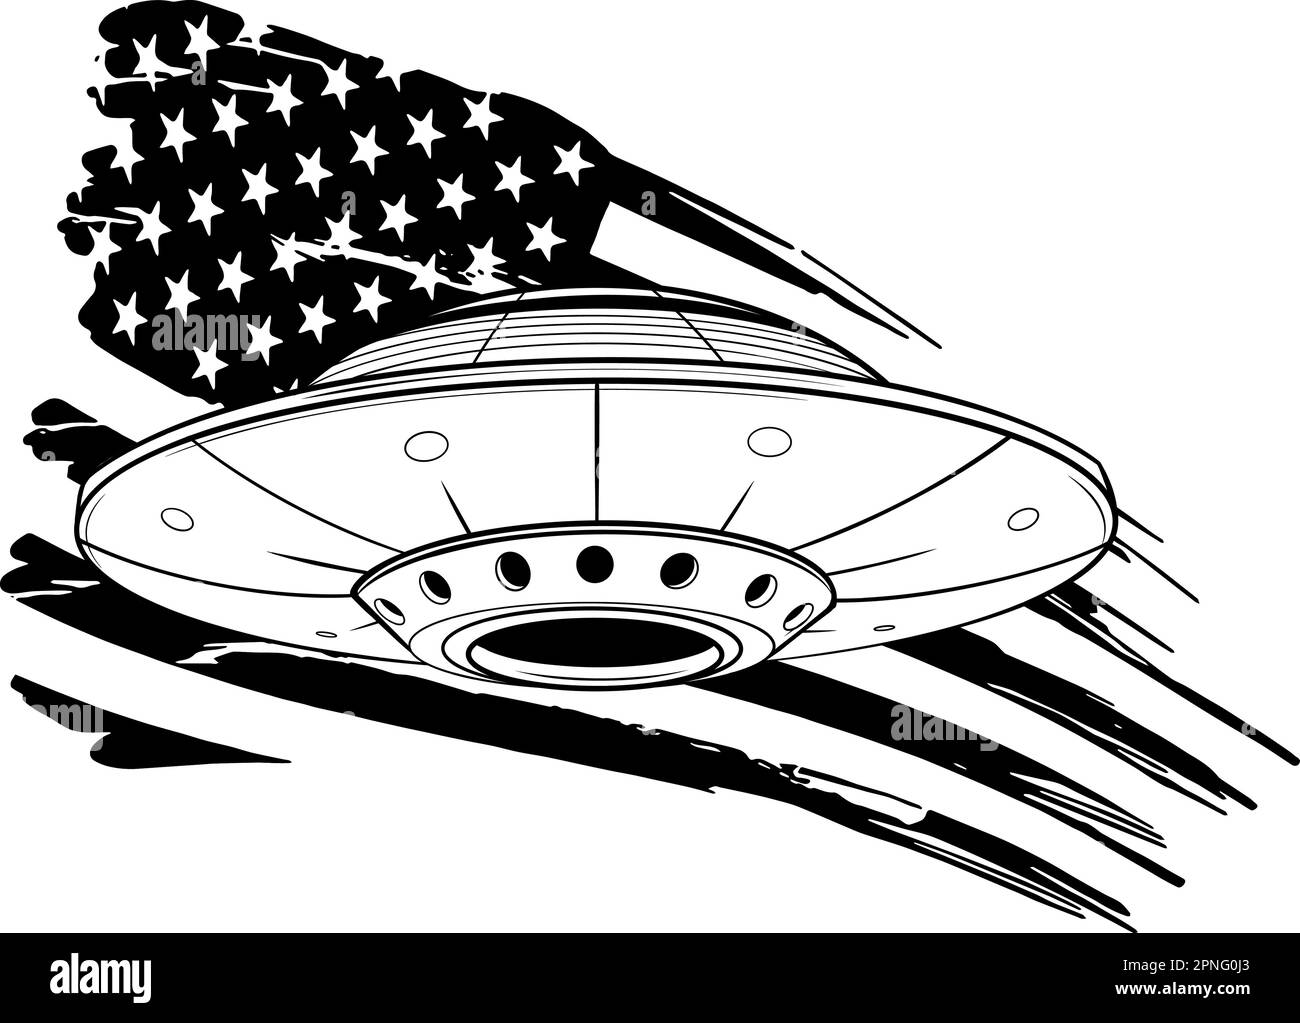 vector illustration of monochrome ufo with american flag Stock Vector